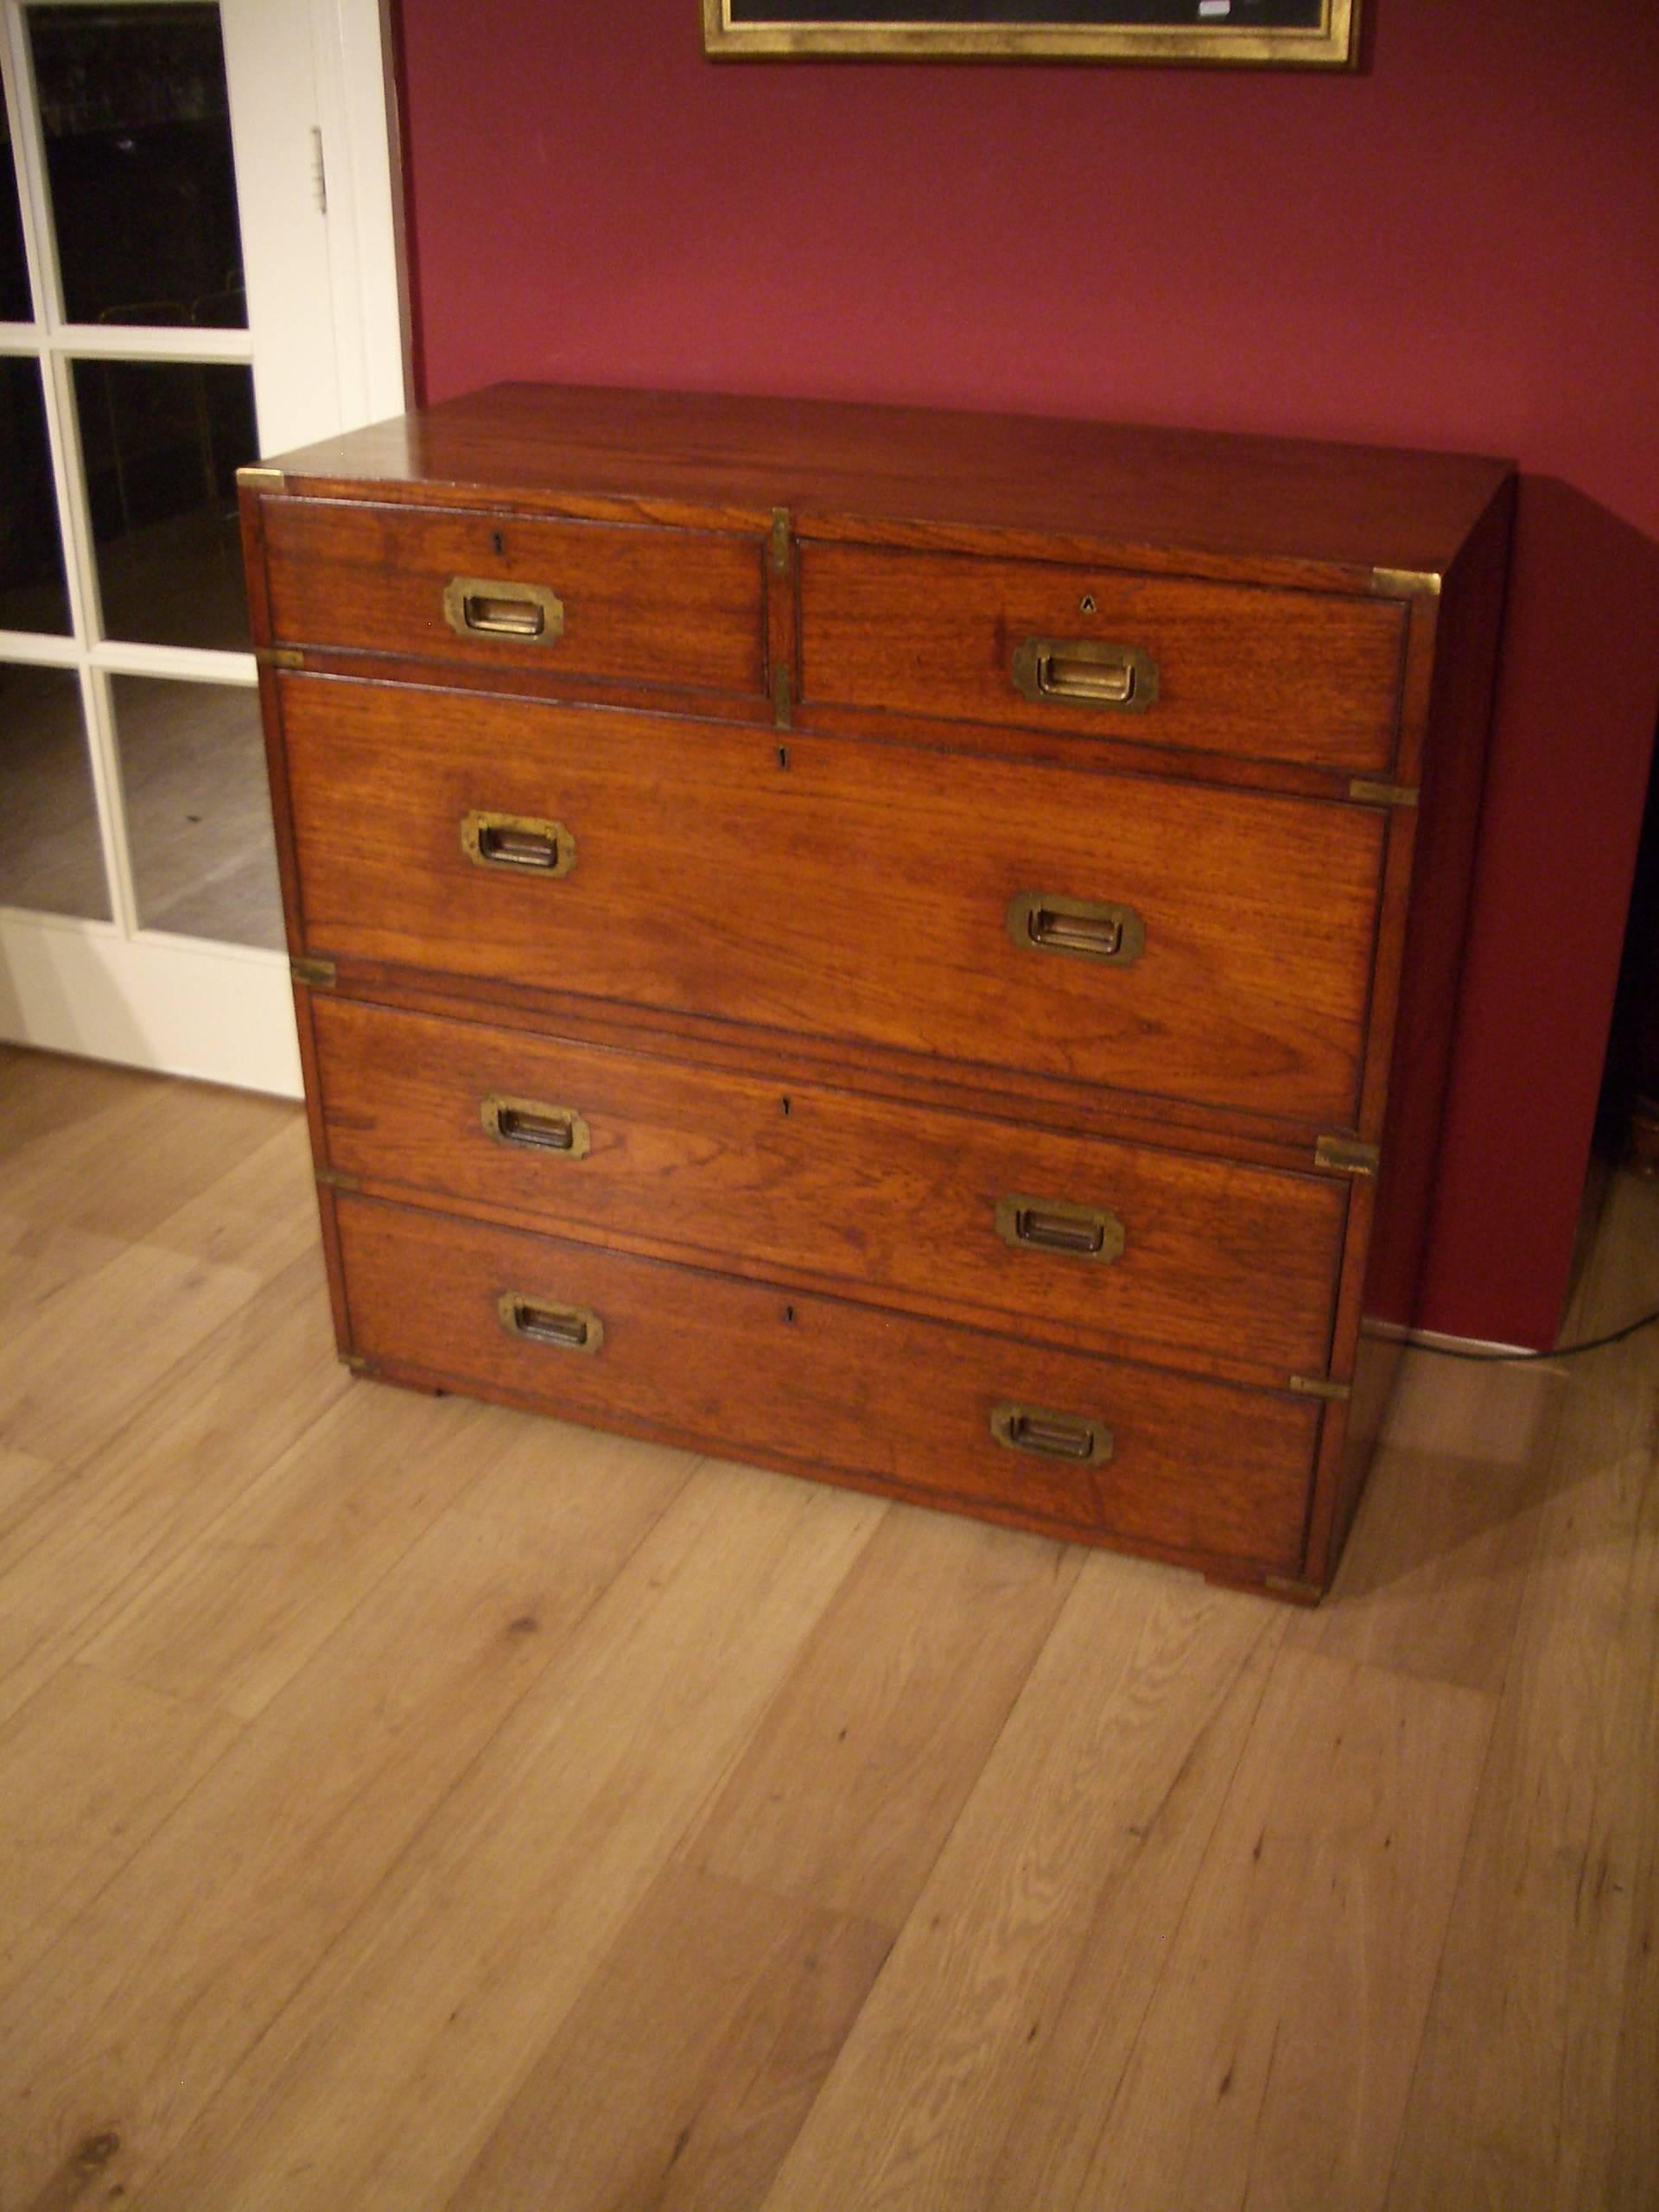 Impressive teak wooden Victorian Campaign chest of drawers. It consists of two parts and is in original condition. The chest of drawers is produced by the company Army and Navy C.L.S. (for more information, read at the end) the chest of drawers has